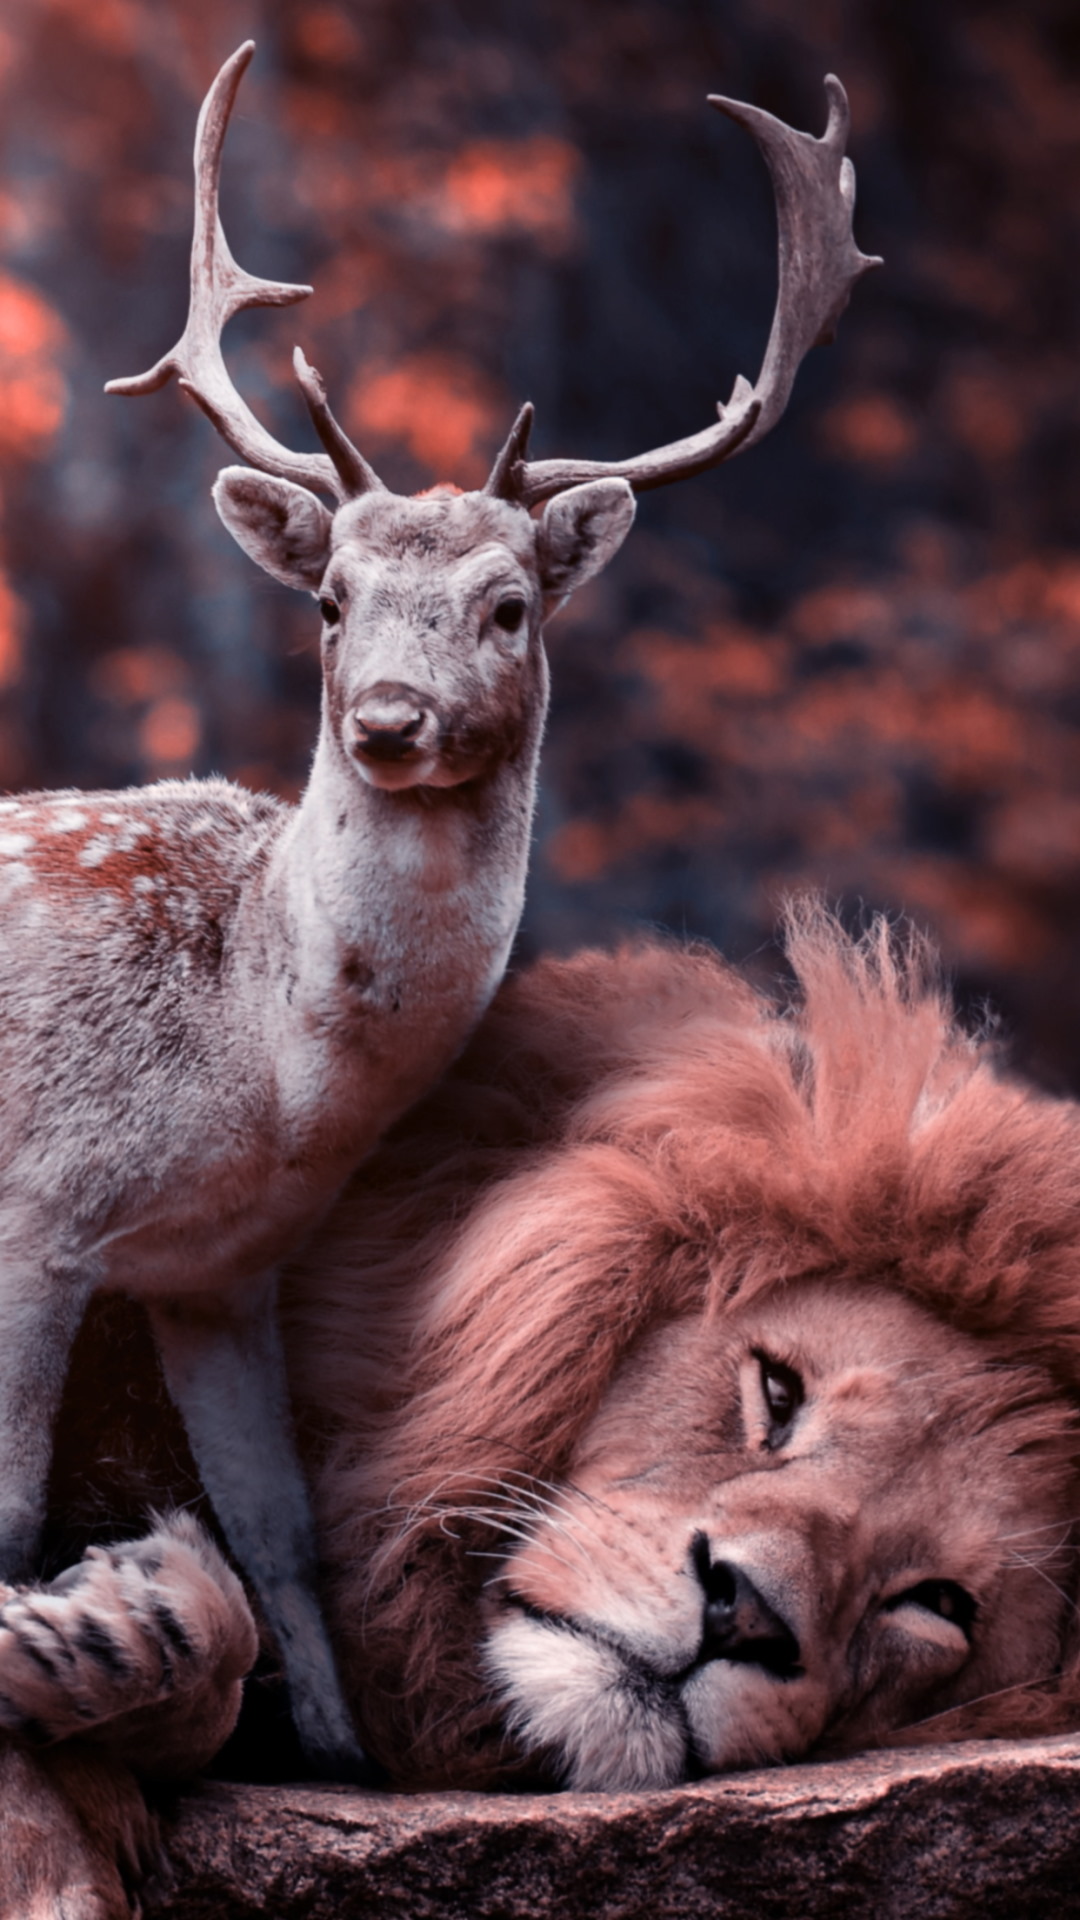 The lion and the deer wallpaper 1080x1920